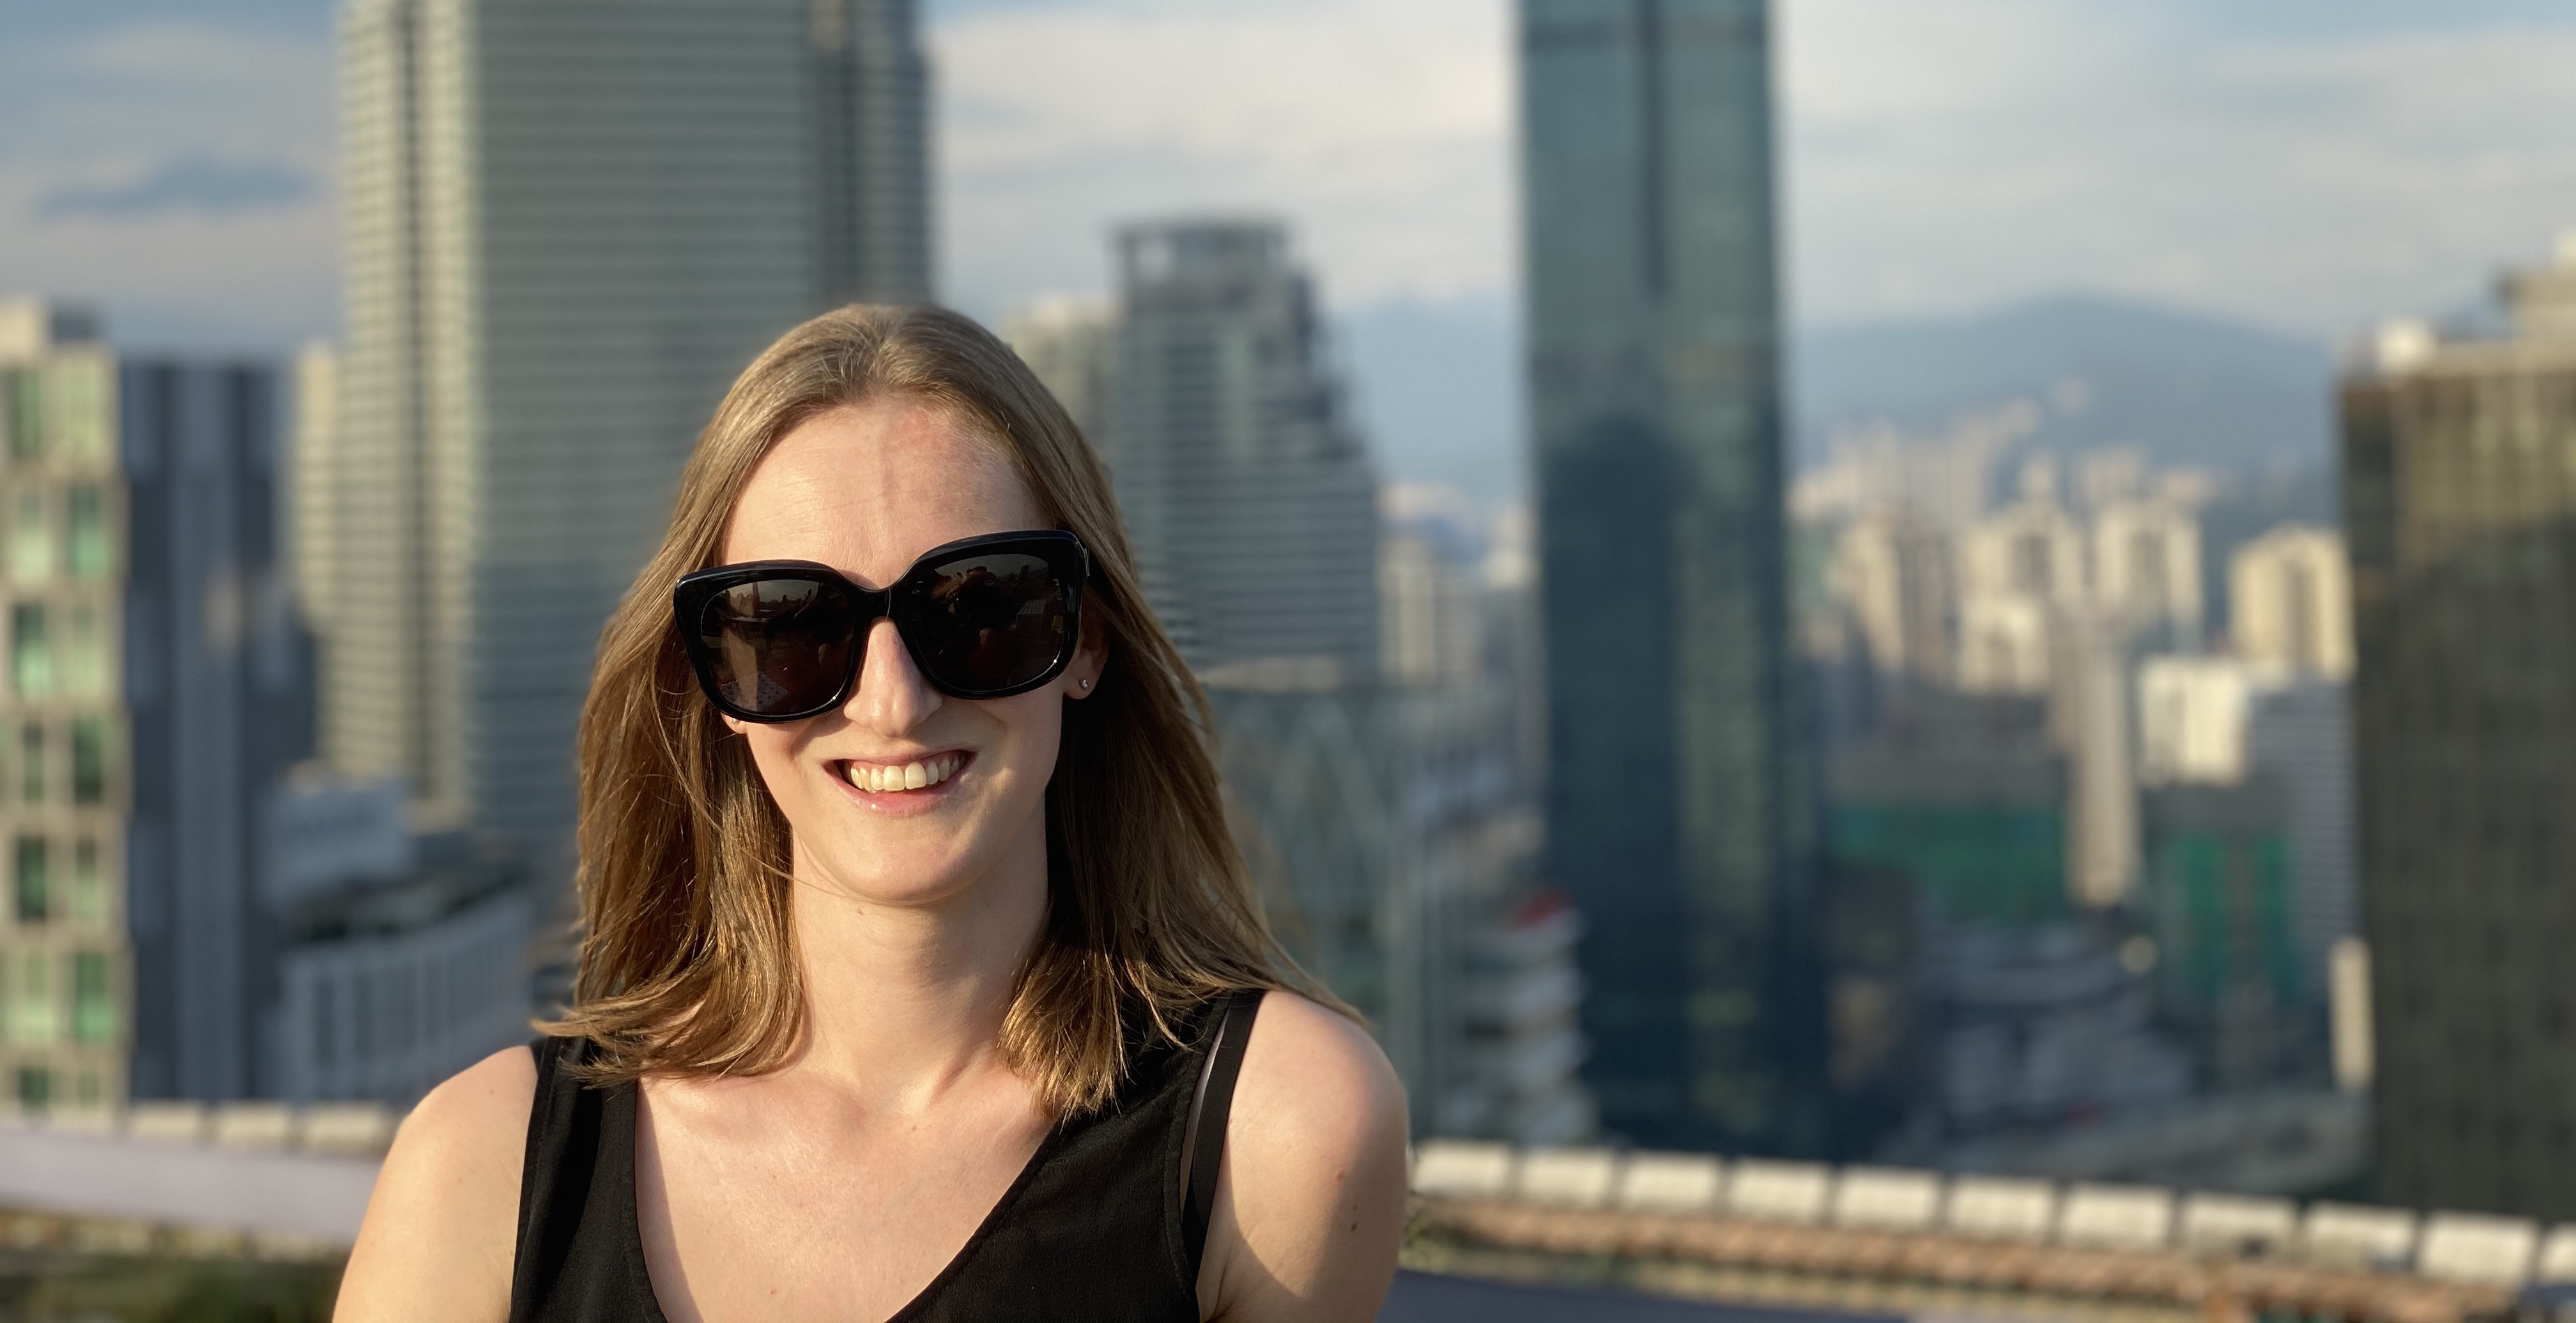 Beijing Bunker: TBJ Writer Robynne Tindall Discusses on the Hidden Costs of Freelancing